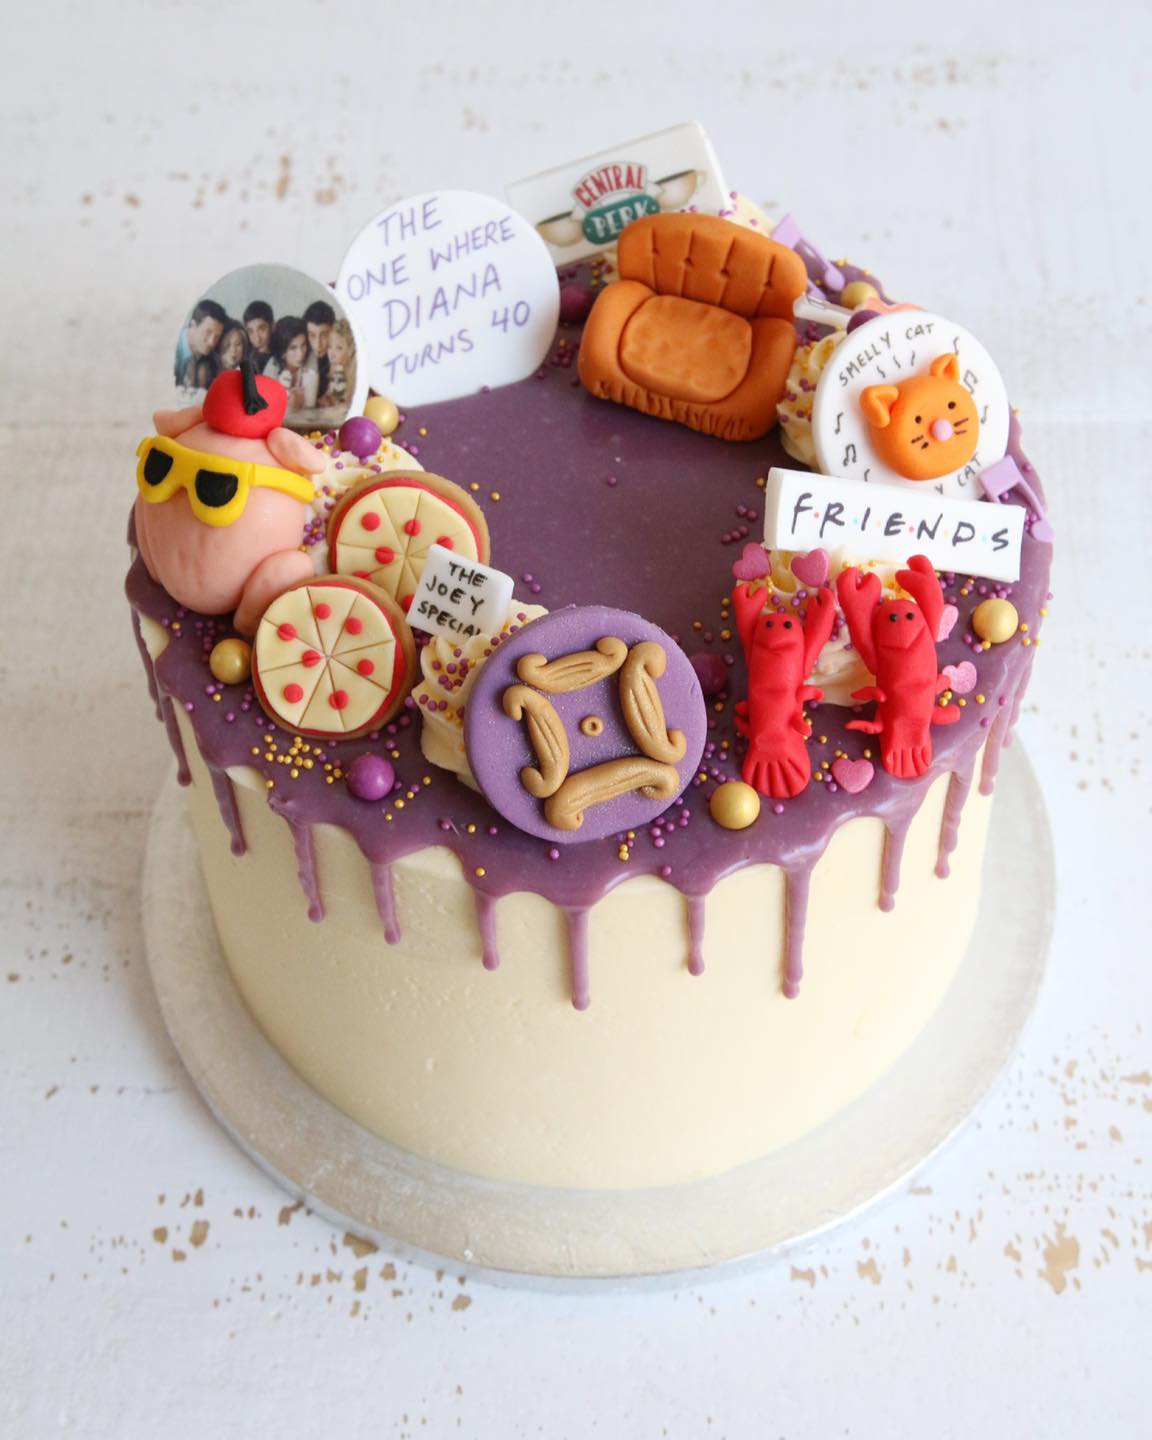 Adult Milestone Birthday Cakes | Afternoon Crumbs | Claygate, Surrey